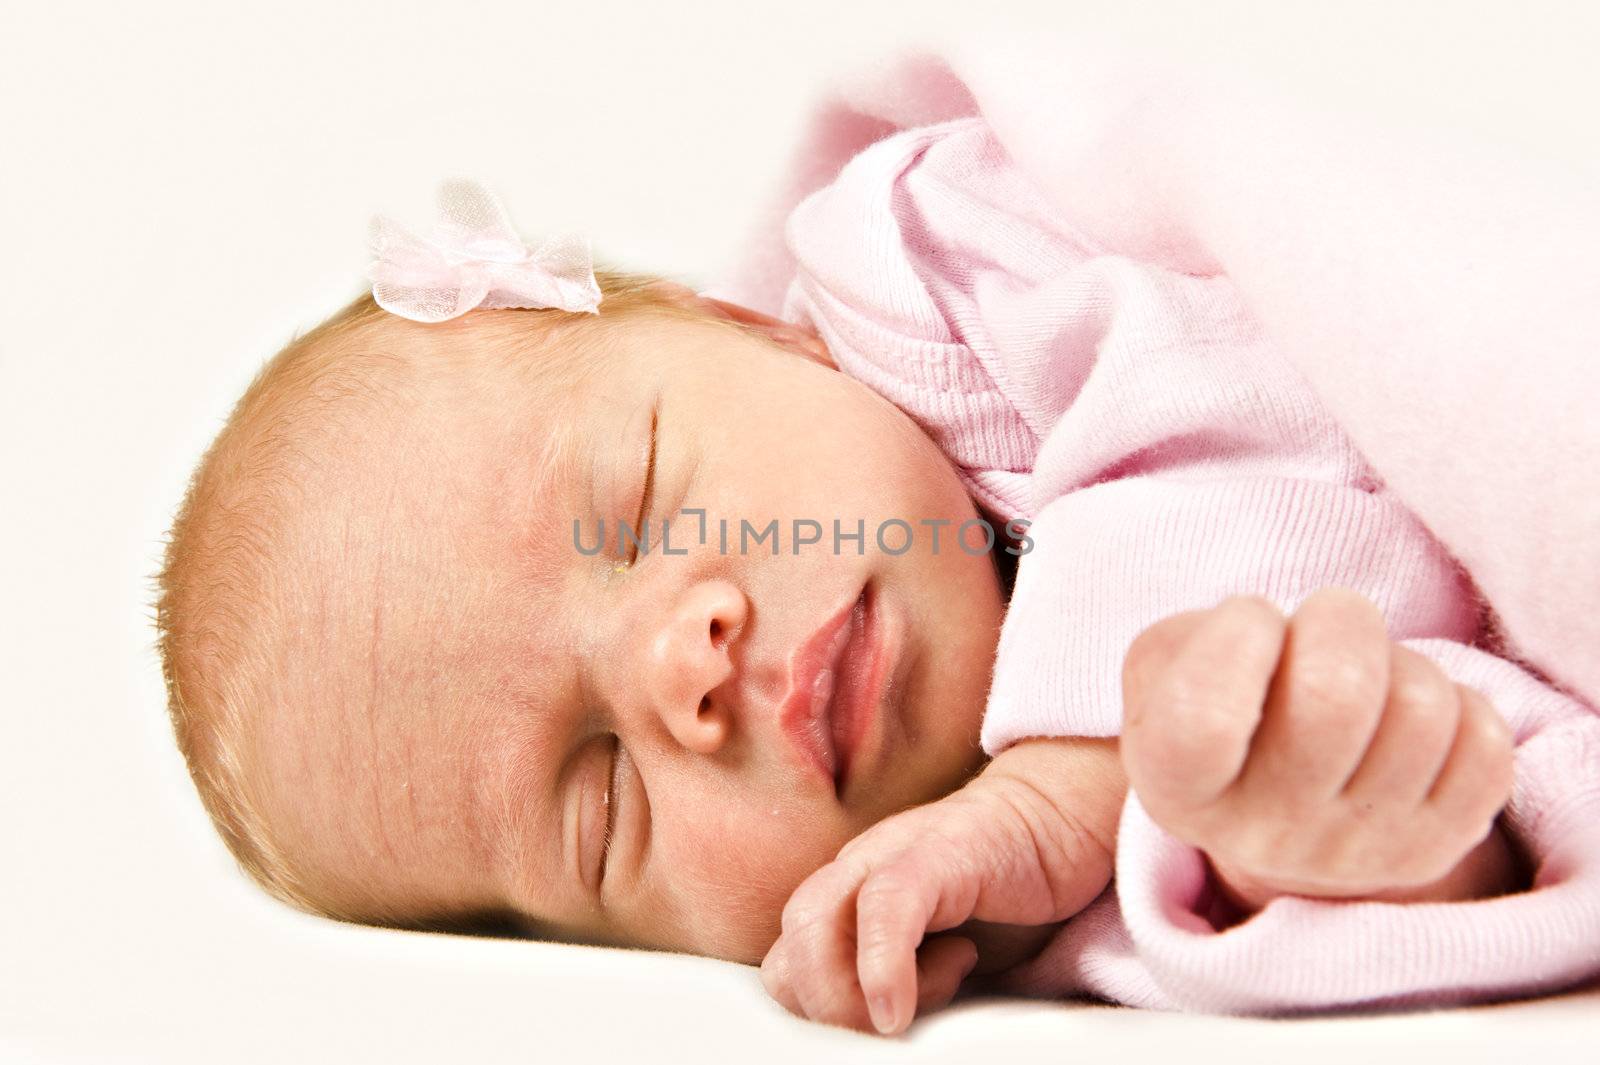 New born baby girl sleeping peacefully by tish1